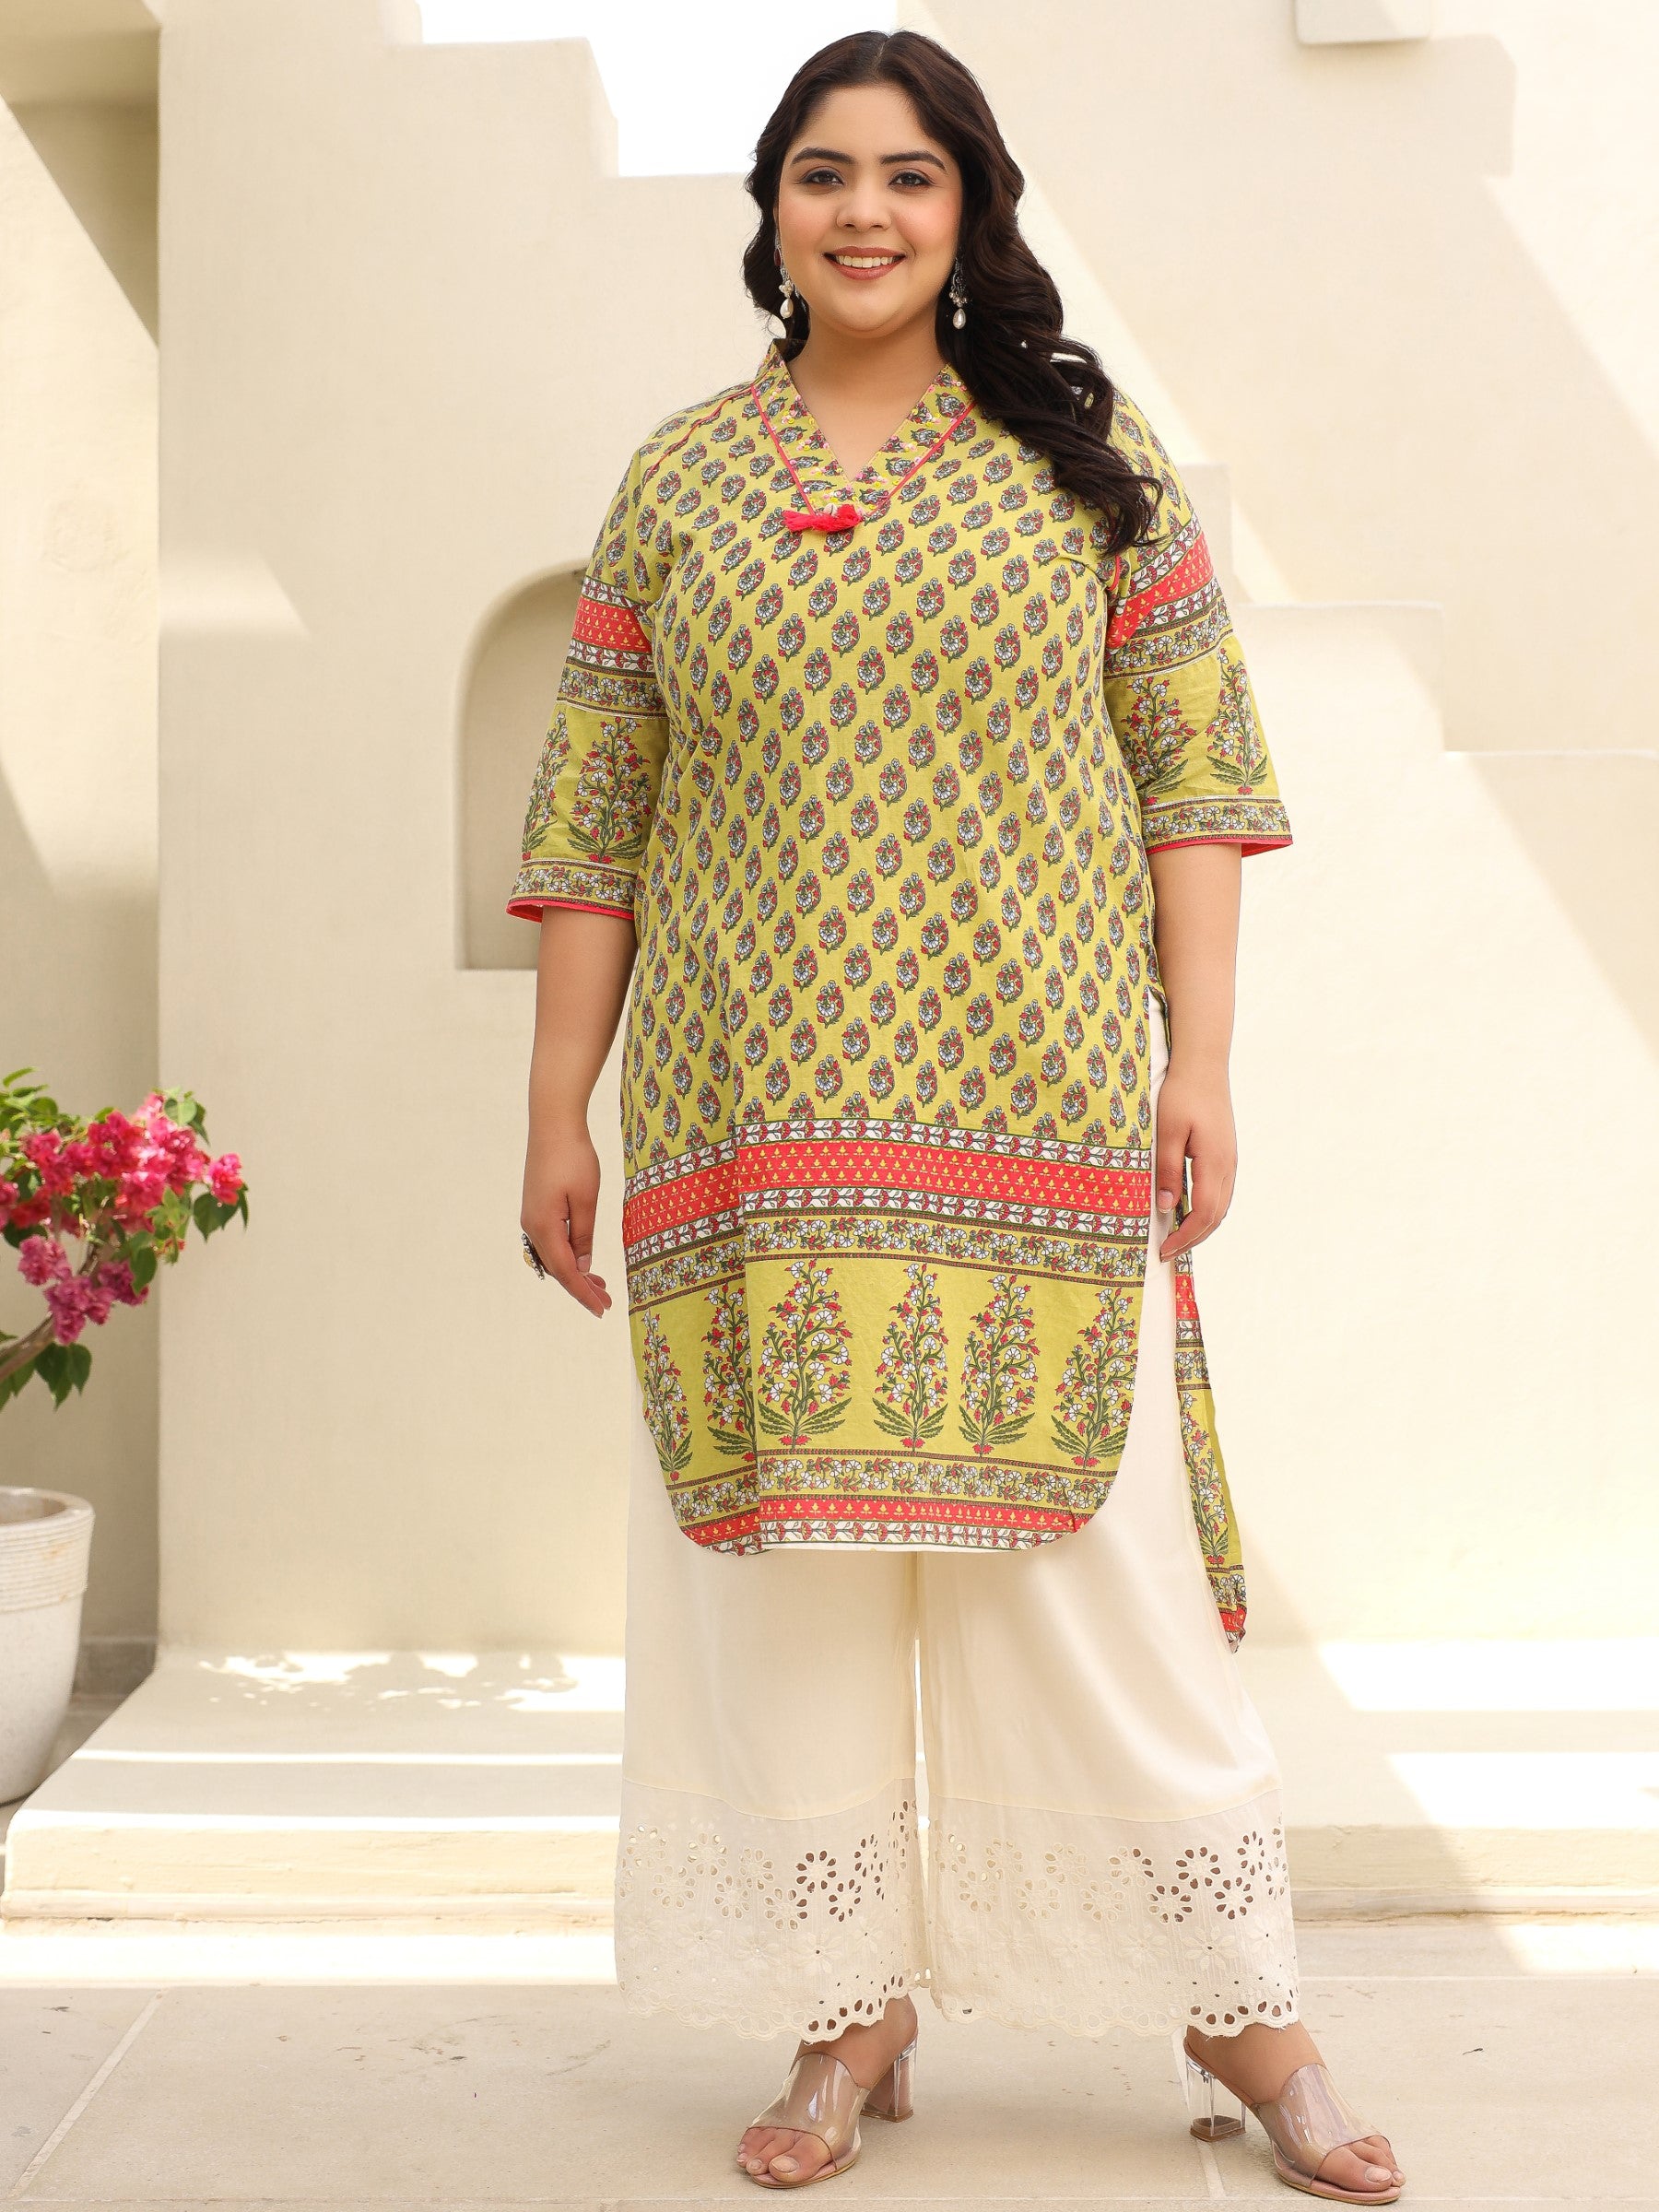 The Madhubala Women Lime Green Ethnic Motif Printed High Low Cotton Plus Size Kurta With Kaudis Tassels & Contract Piping